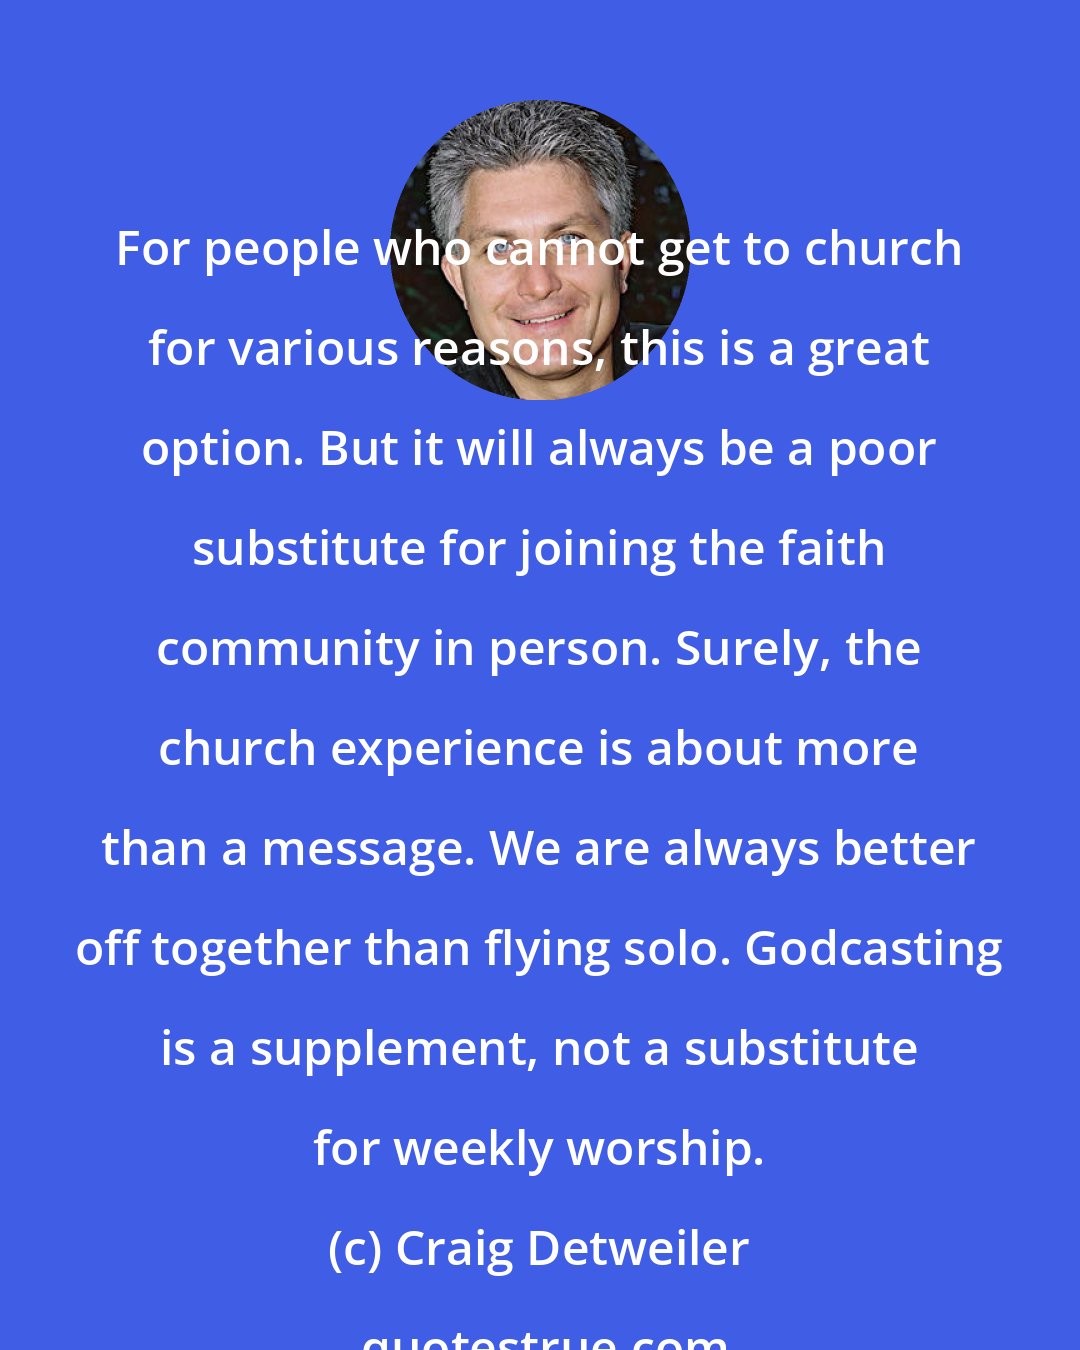 Craig Detweiler: For people who cannot get to church for various reasons, this is a great option. But it will always be a poor substitute for joining the faith community in person. Surely, the church experience is about more than a message. We are always better off together than flying solo. Godcasting is a supplement, not a substitute for weekly worship.